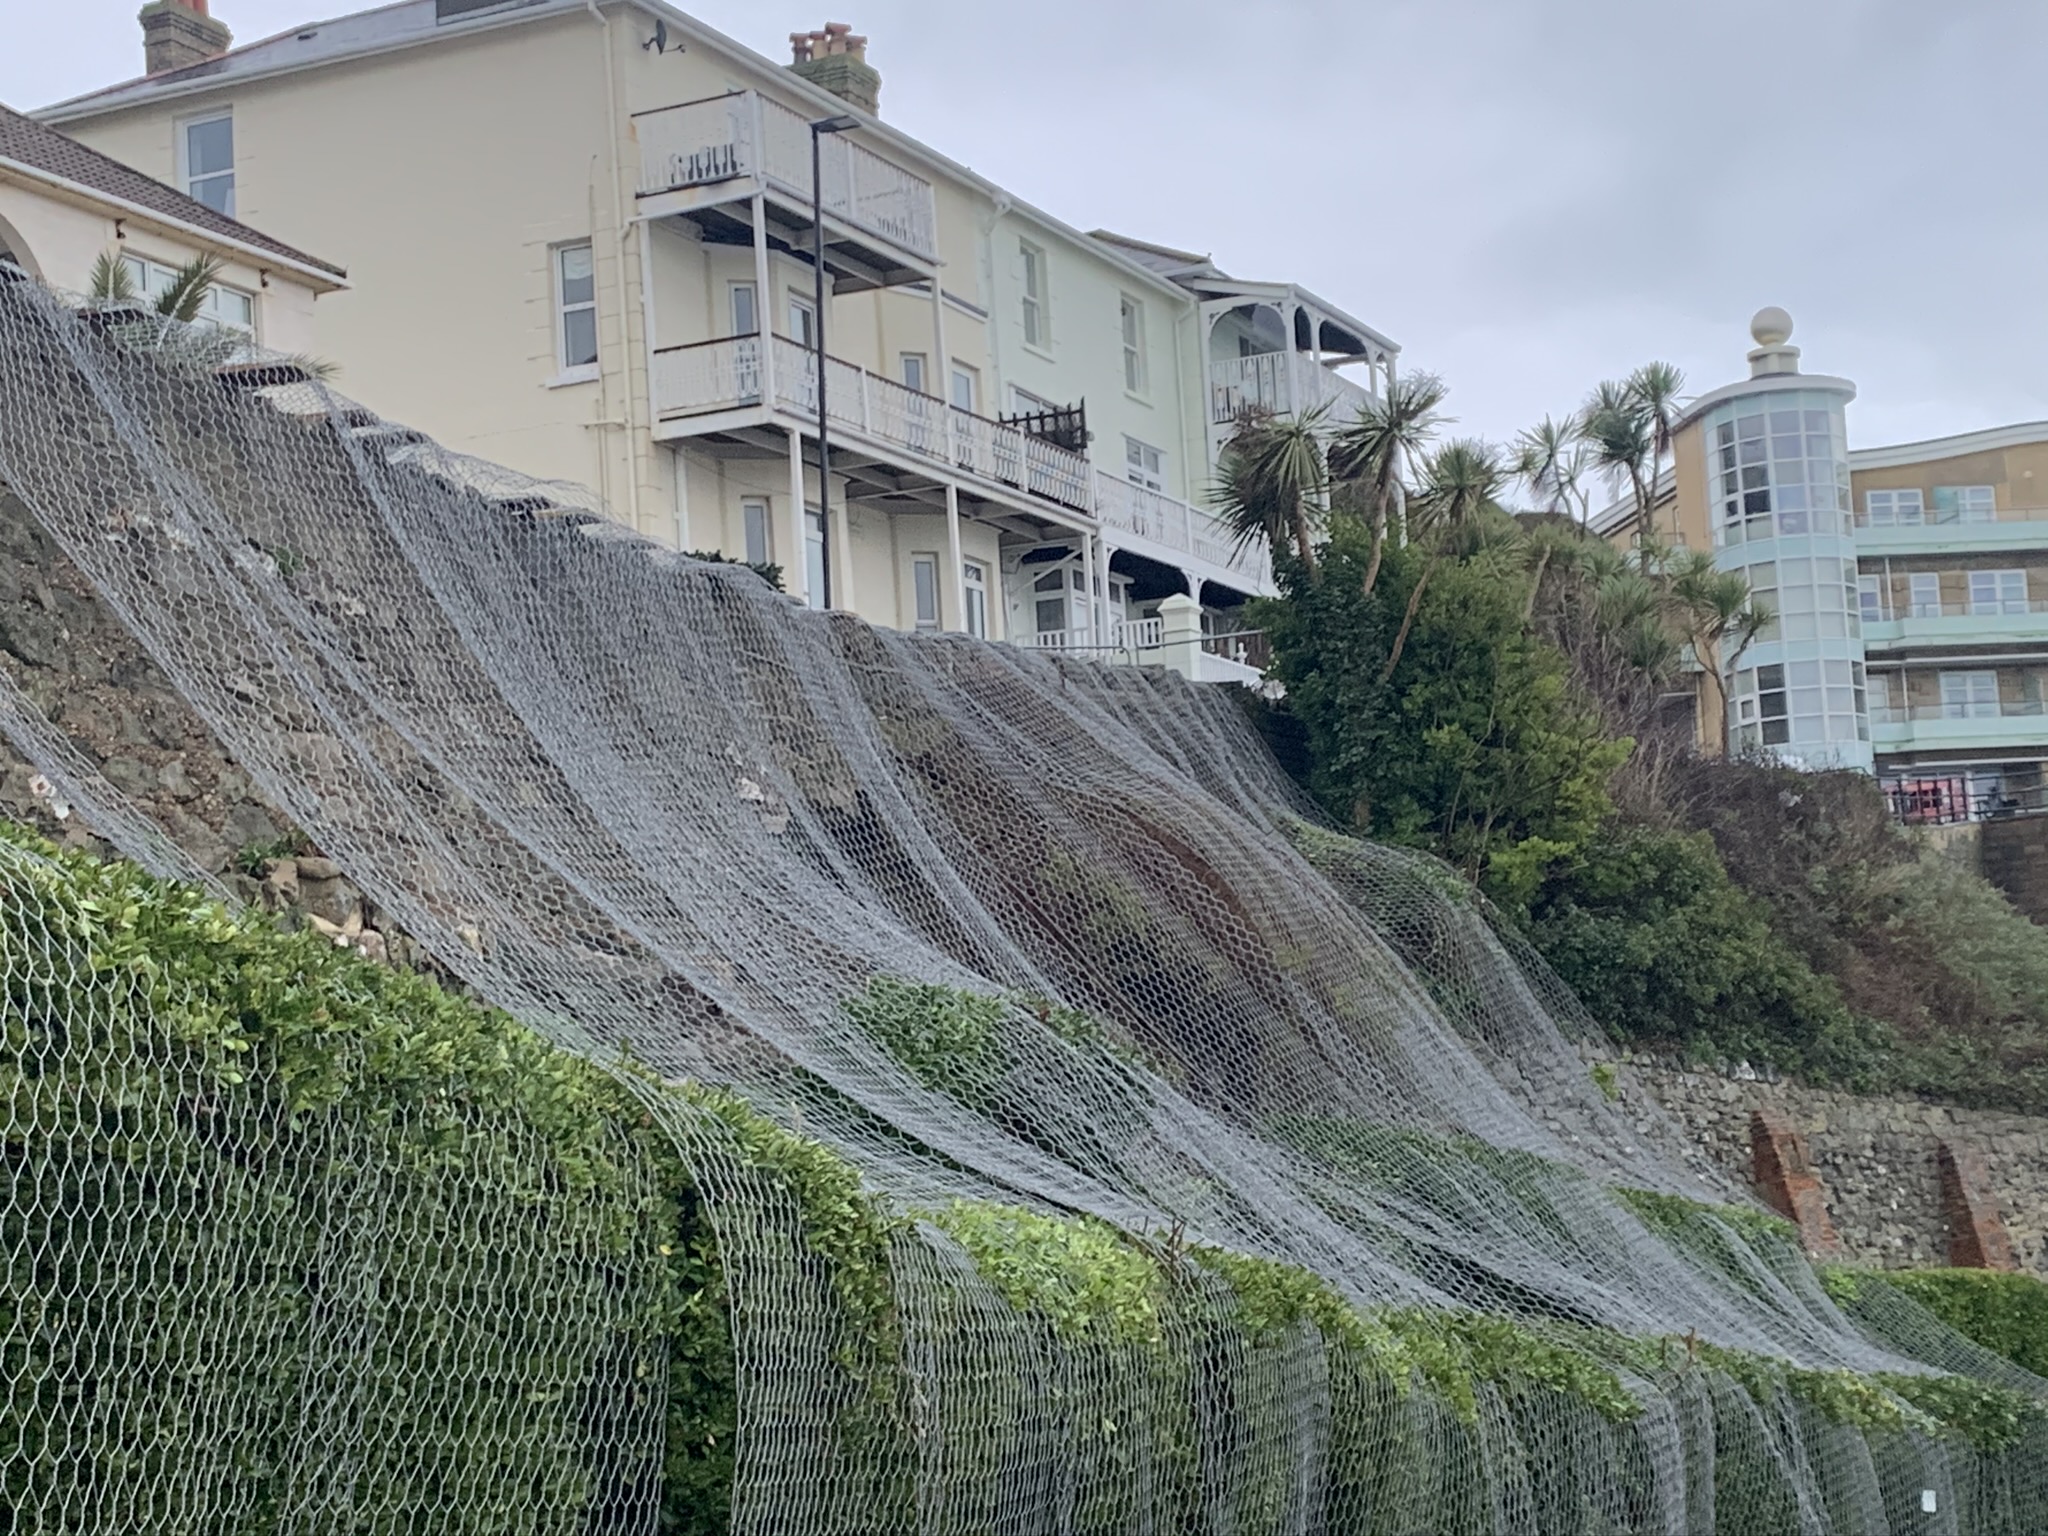 Photo showing terracing at Belgrave Road Ventnor covered by wire netting following the partial collapse of a wall